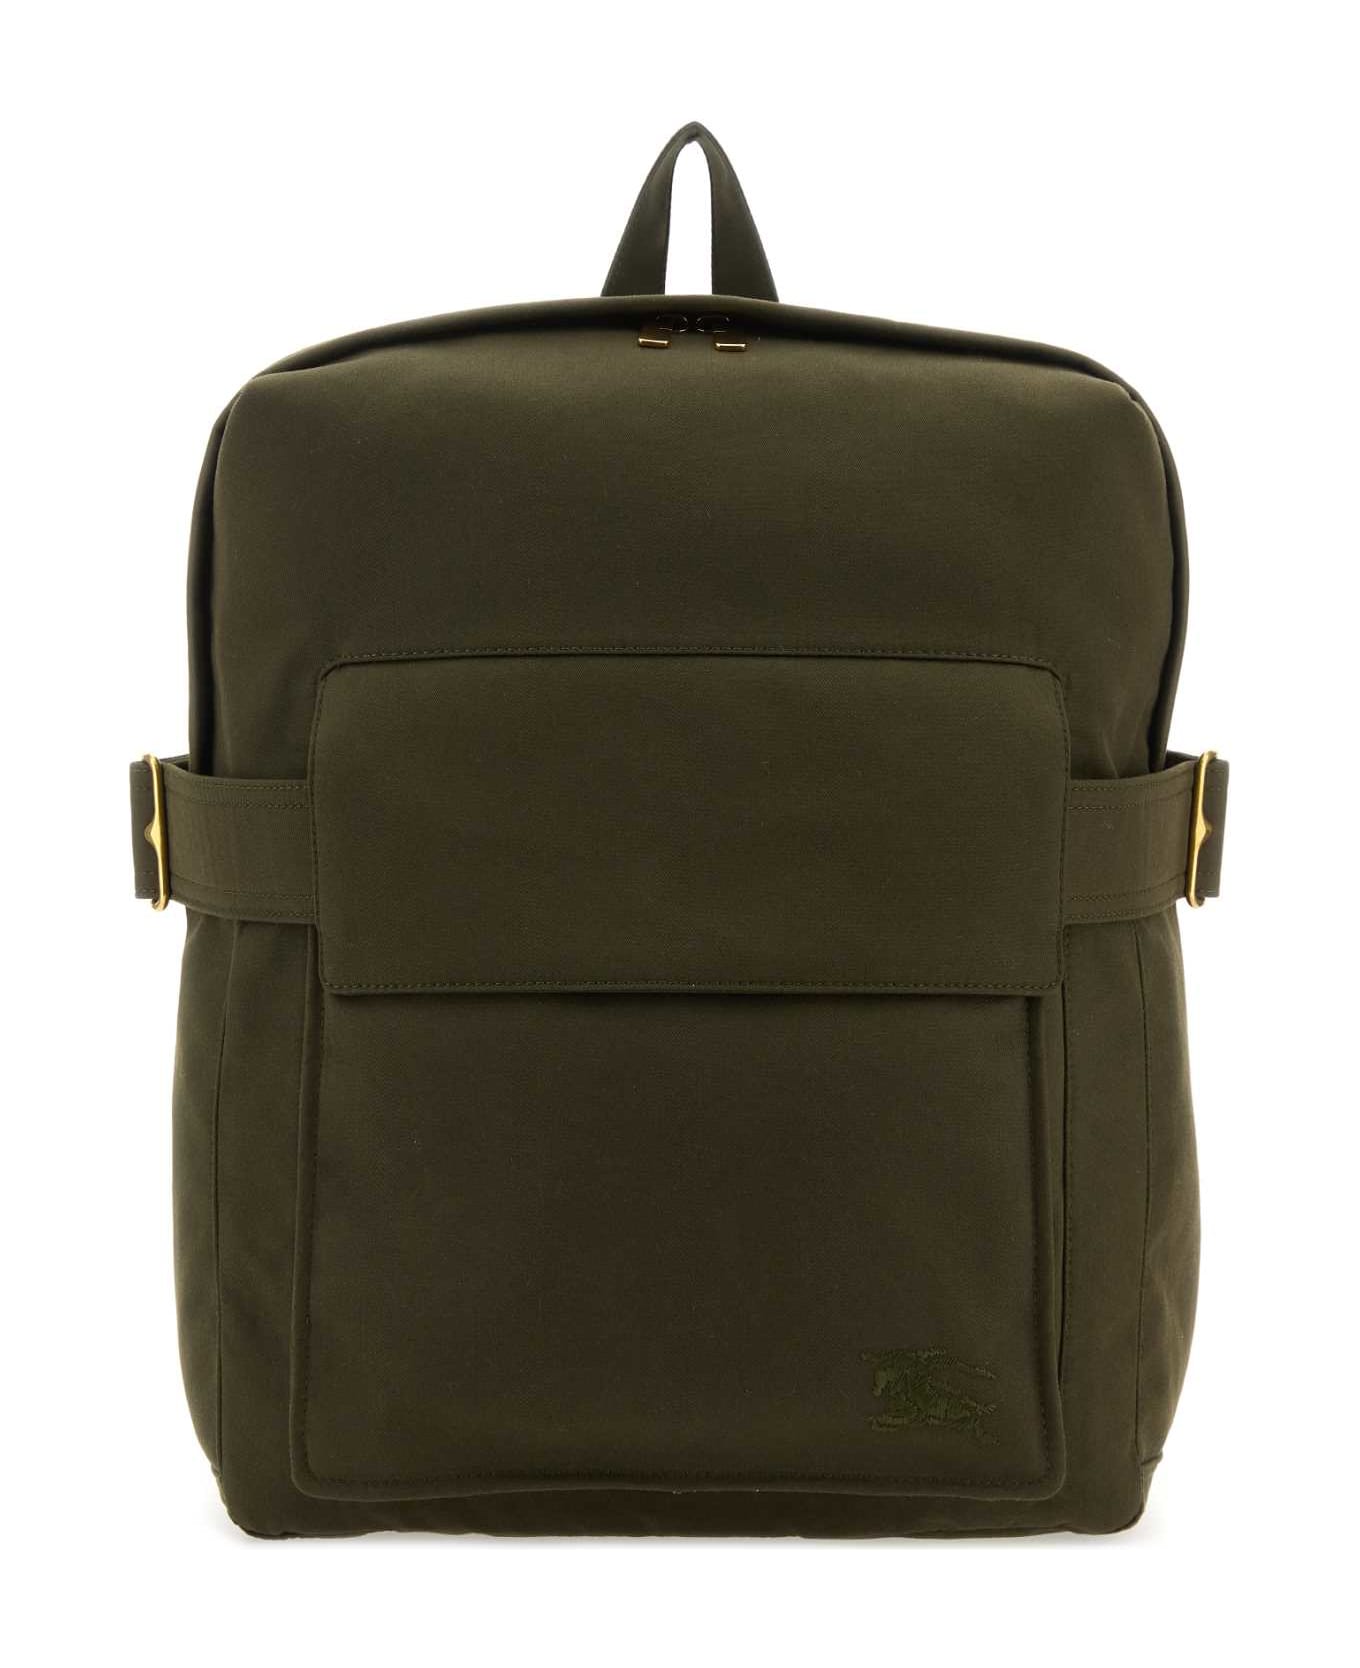 Burberry Army Green Polyester Blend Trench Backpack - MILITARY